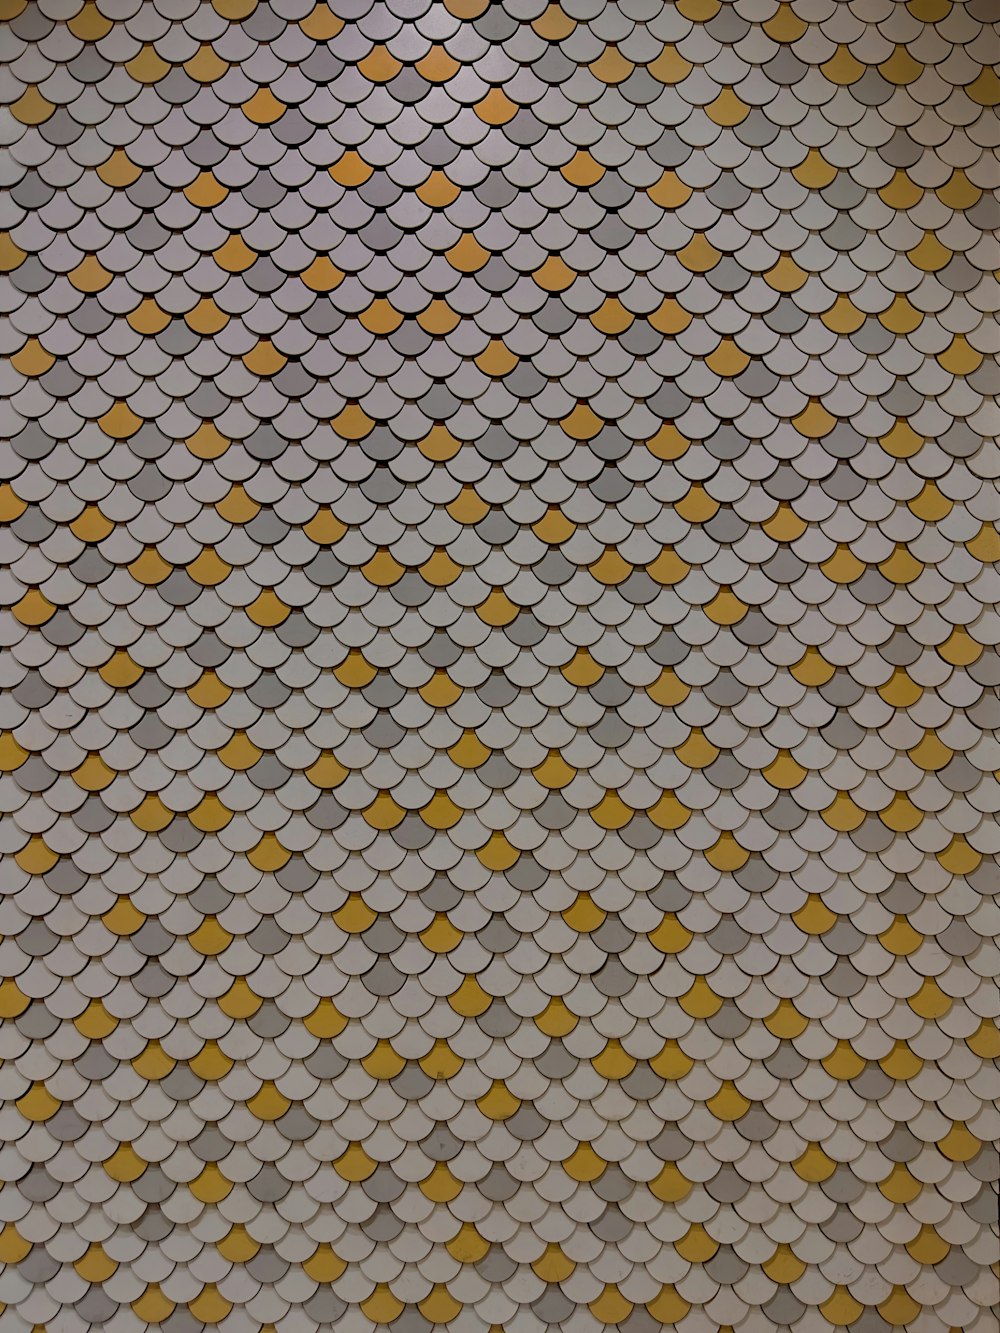 a tiled floor with yellow and white tiles